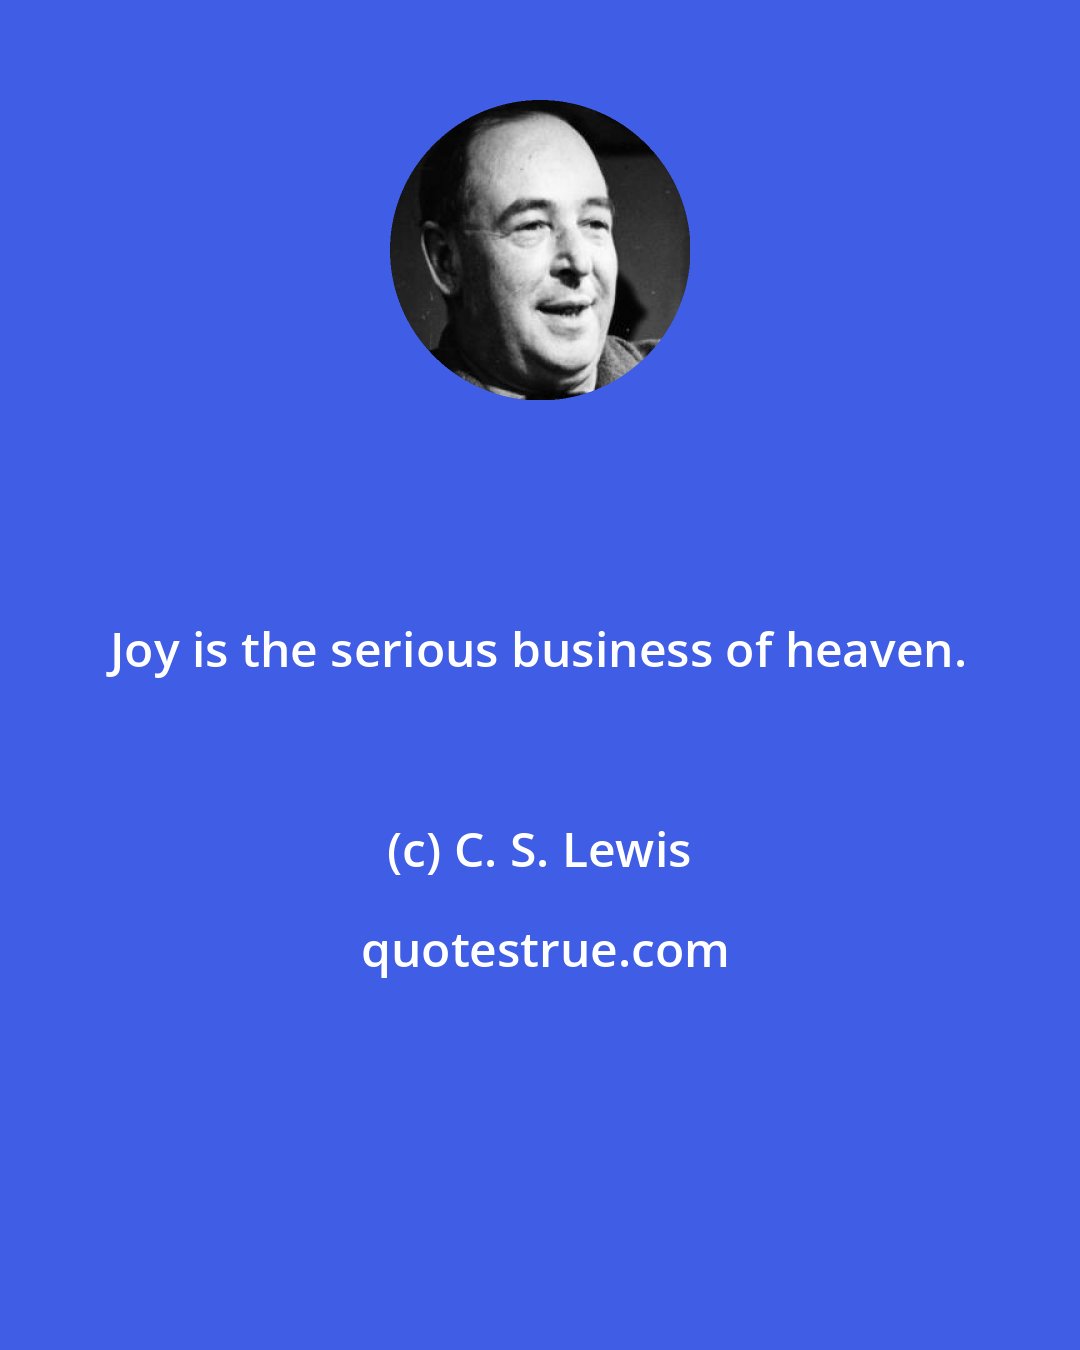 C. S. Lewis: Joy is the serious business of heaven.